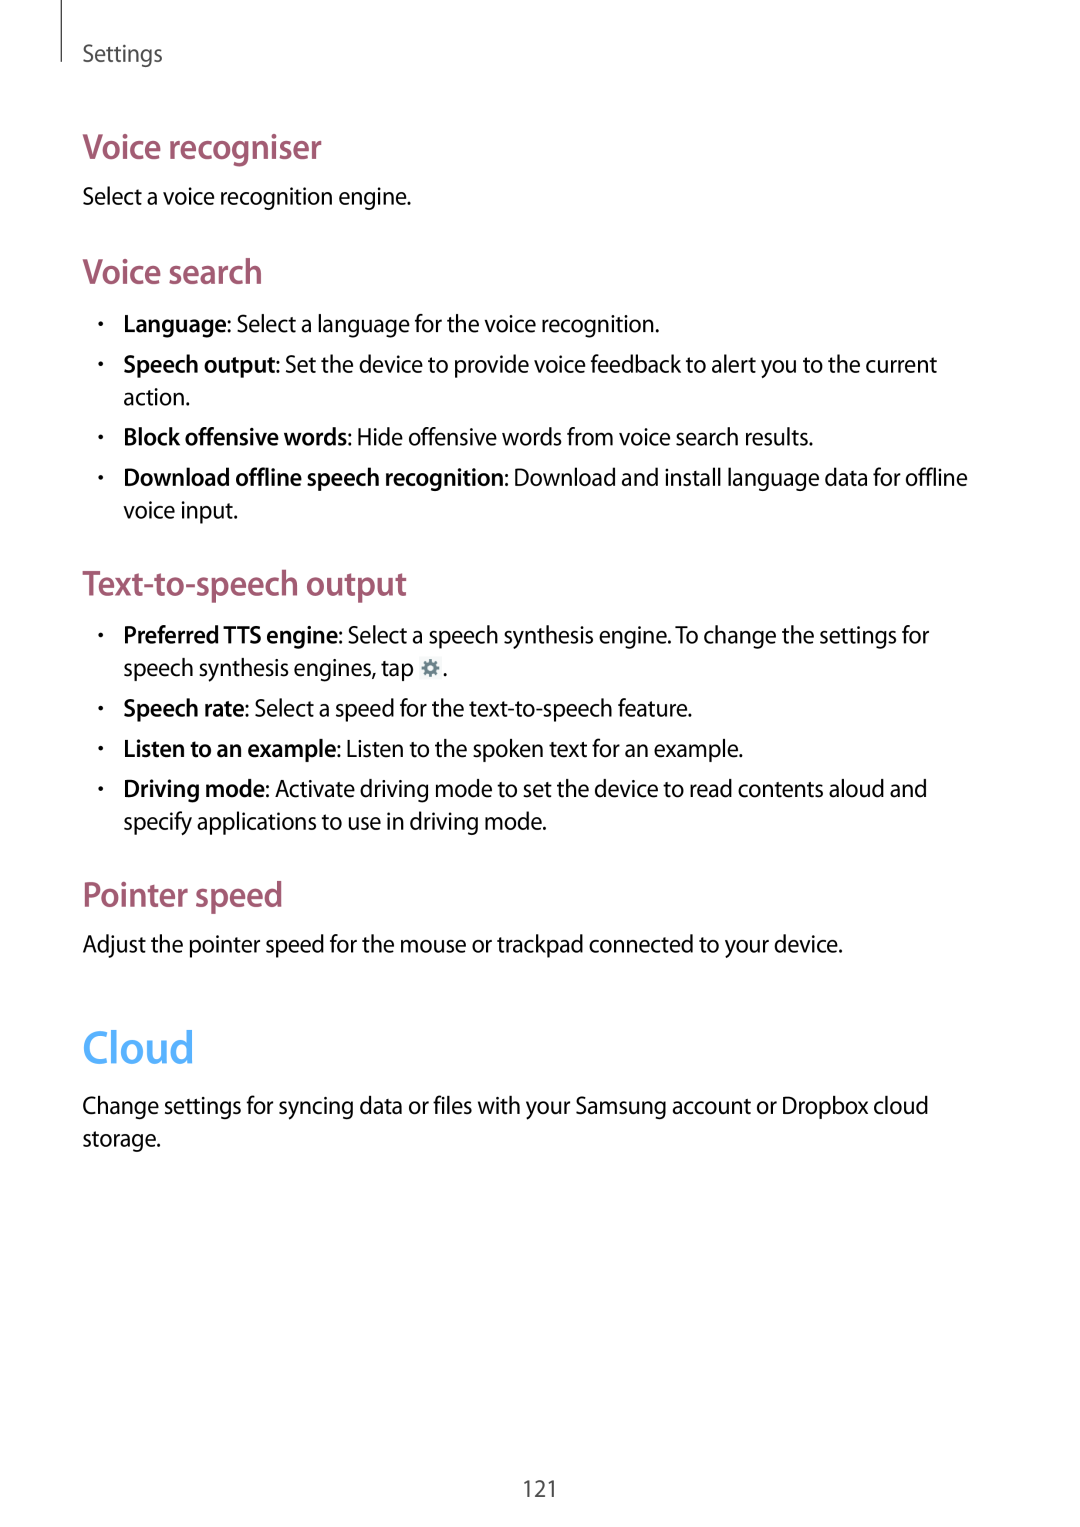 Samsung GT-N5100 user manual Cloud, Voice recogniser, Voice search, Text-to-speech output, Pointer speed, Settings 